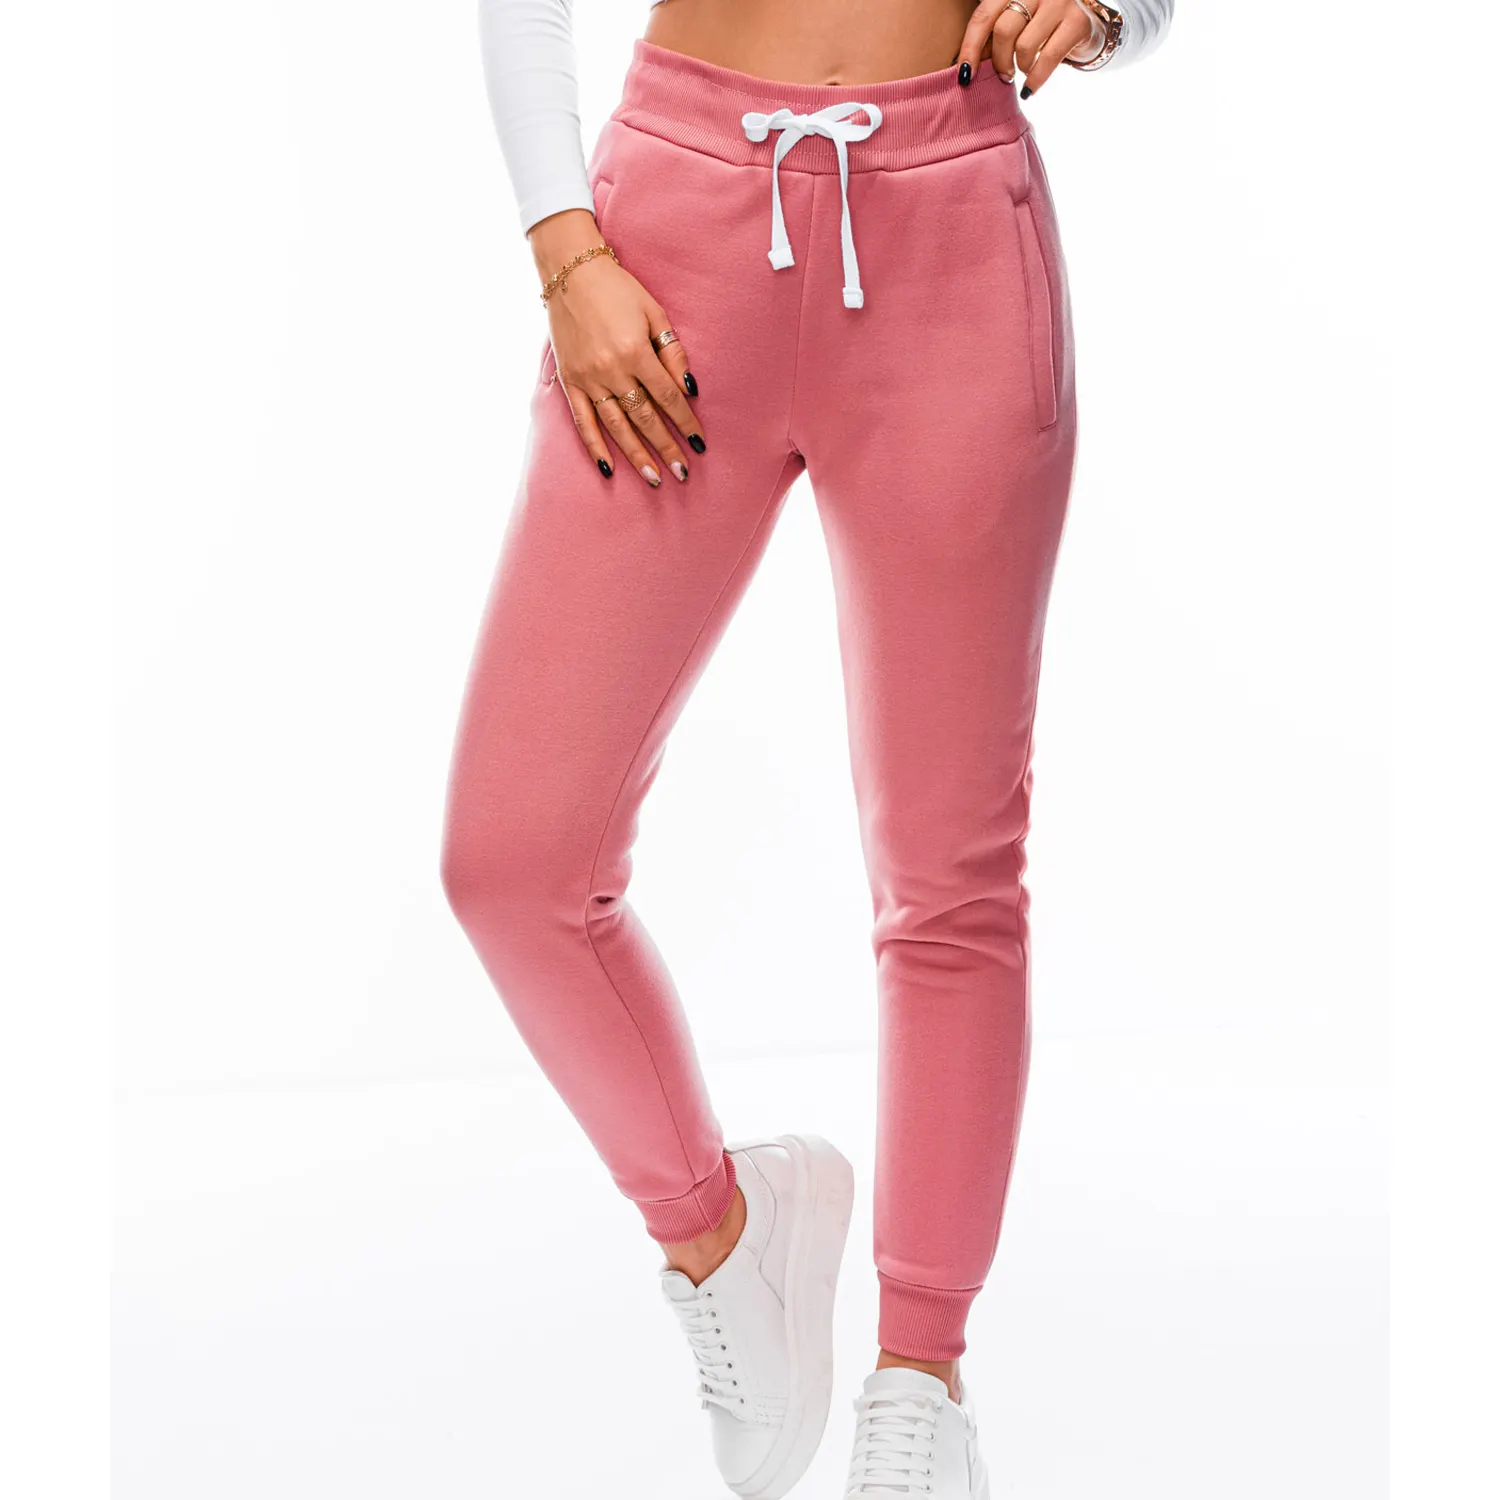 Casual Streetwear Young Ladies Fashionable Top Quality Pants 100% Export Oriented OEM Customized Trousers From Bangladesh